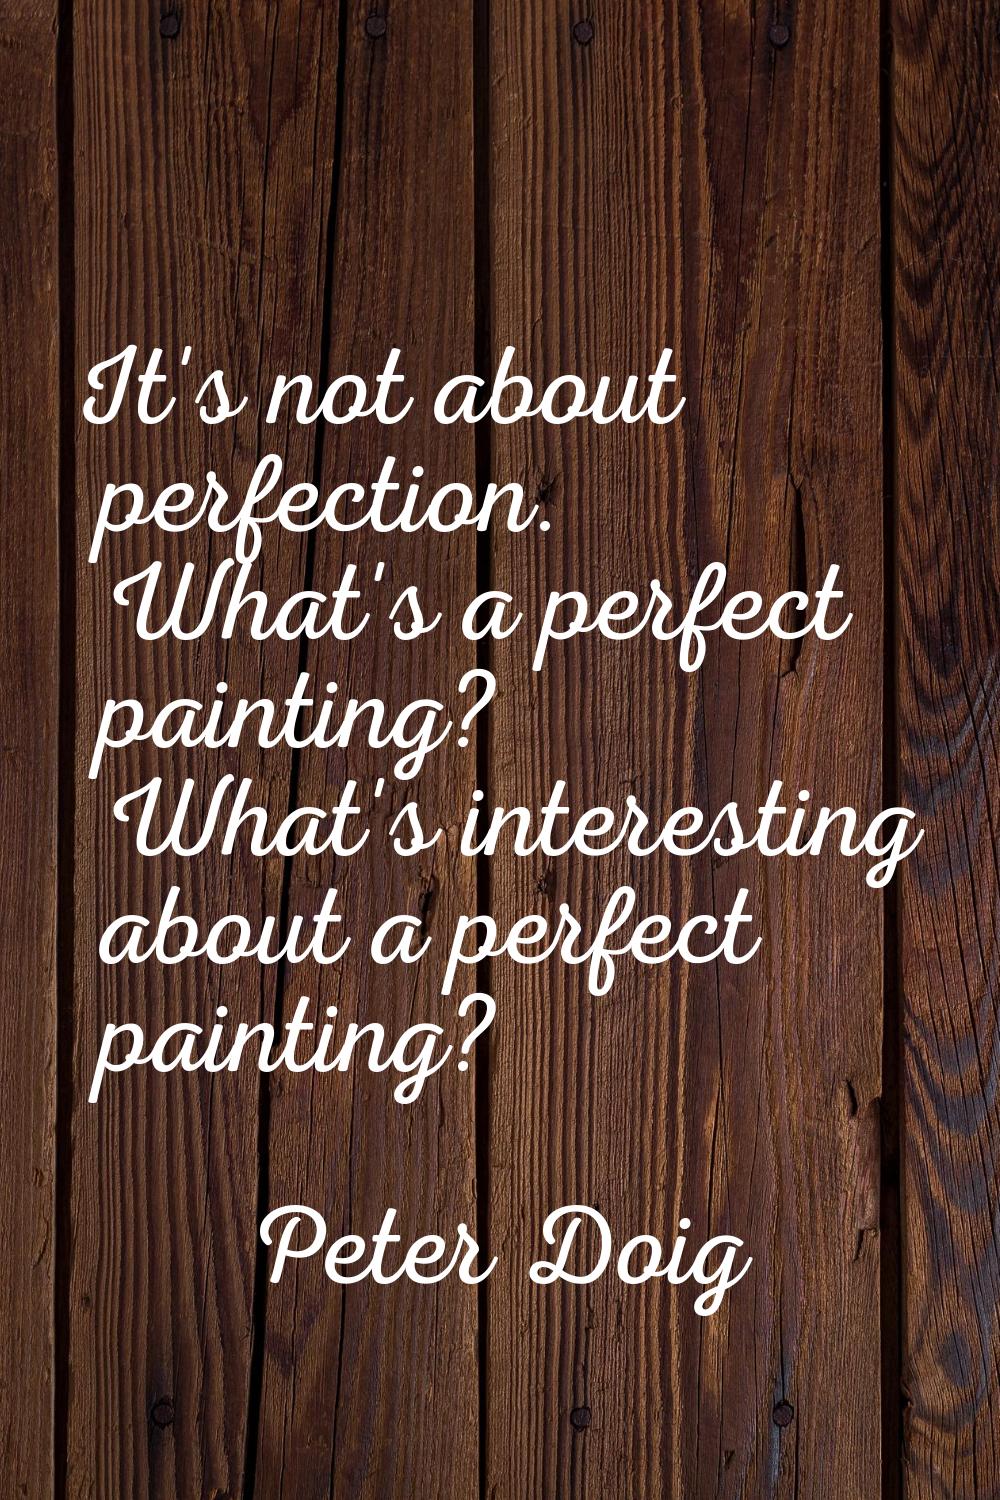 It's not about perfection. What's a perfect painting? What's interesting about a perfect painting?